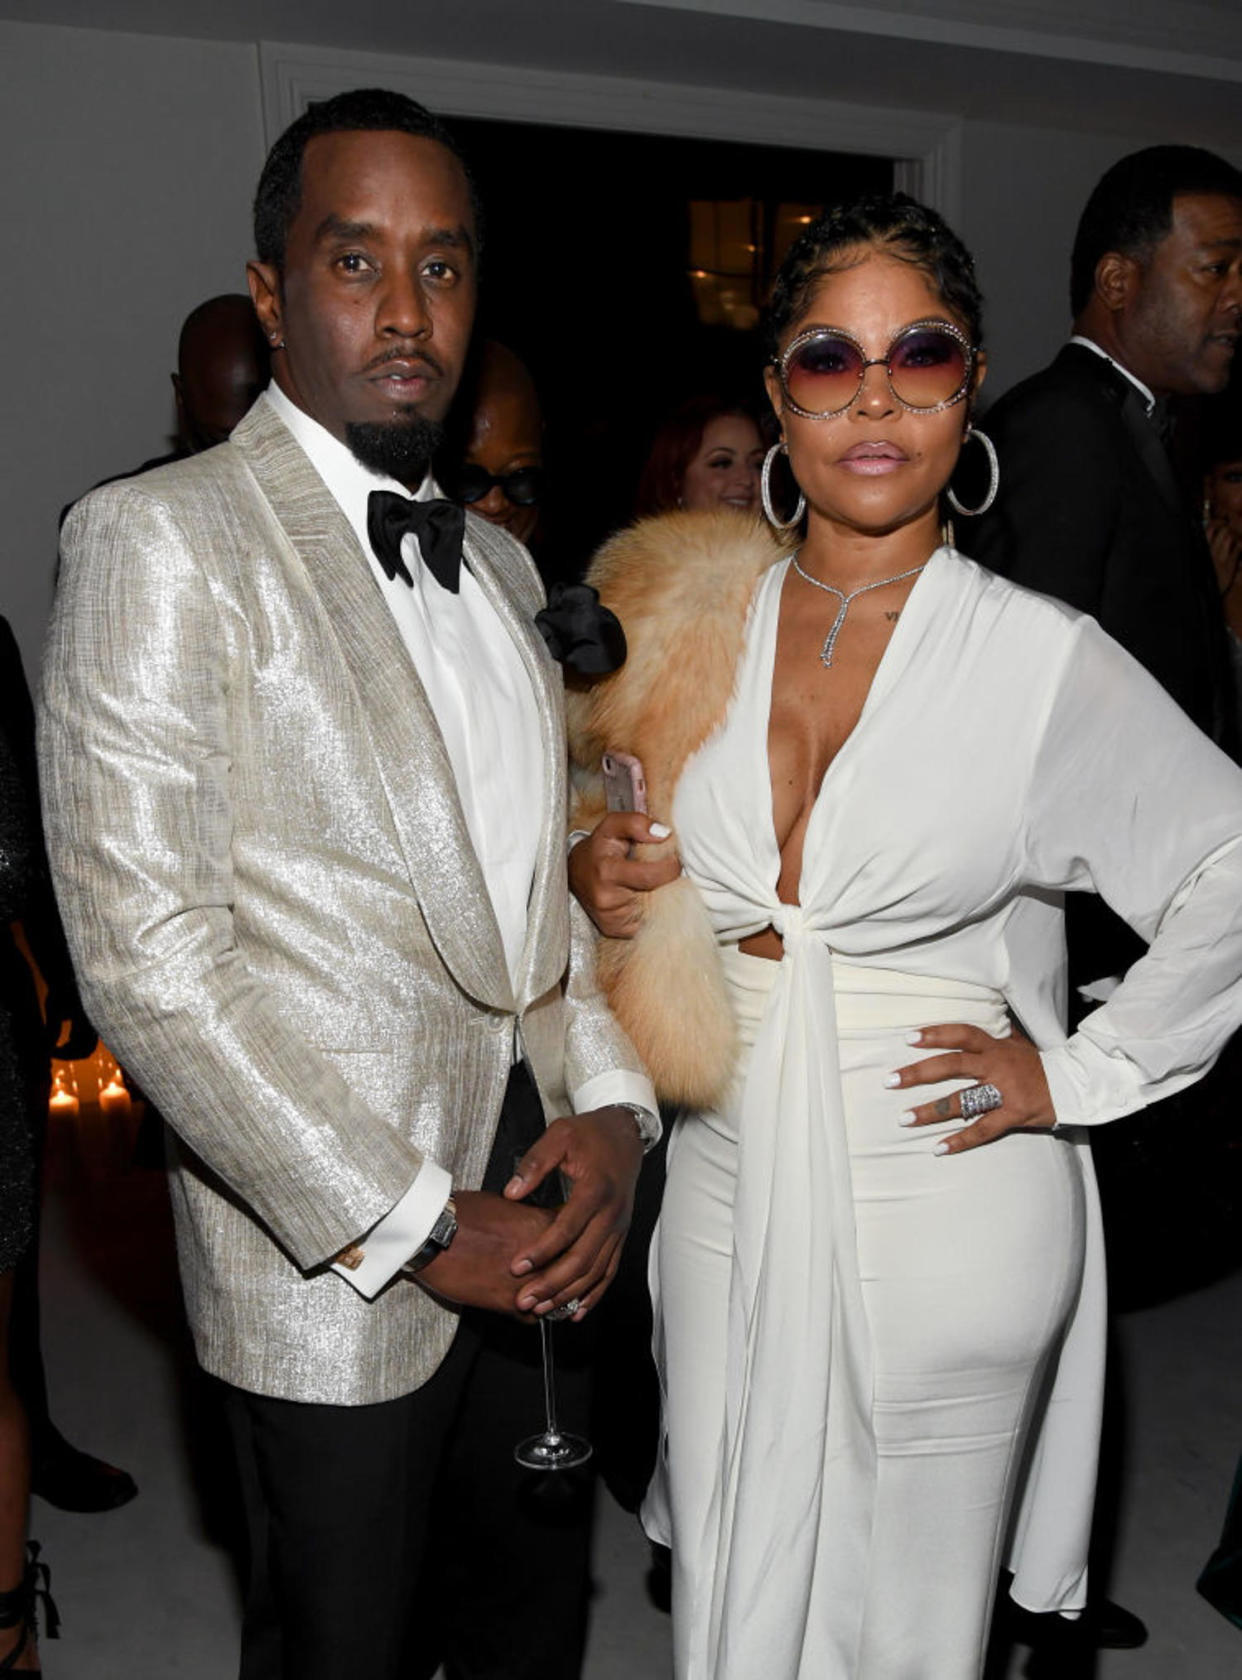 Sean Combs 50th Birthday Bash Presented By Ciroc Vodka (Kevin Mazur / Getty Images )